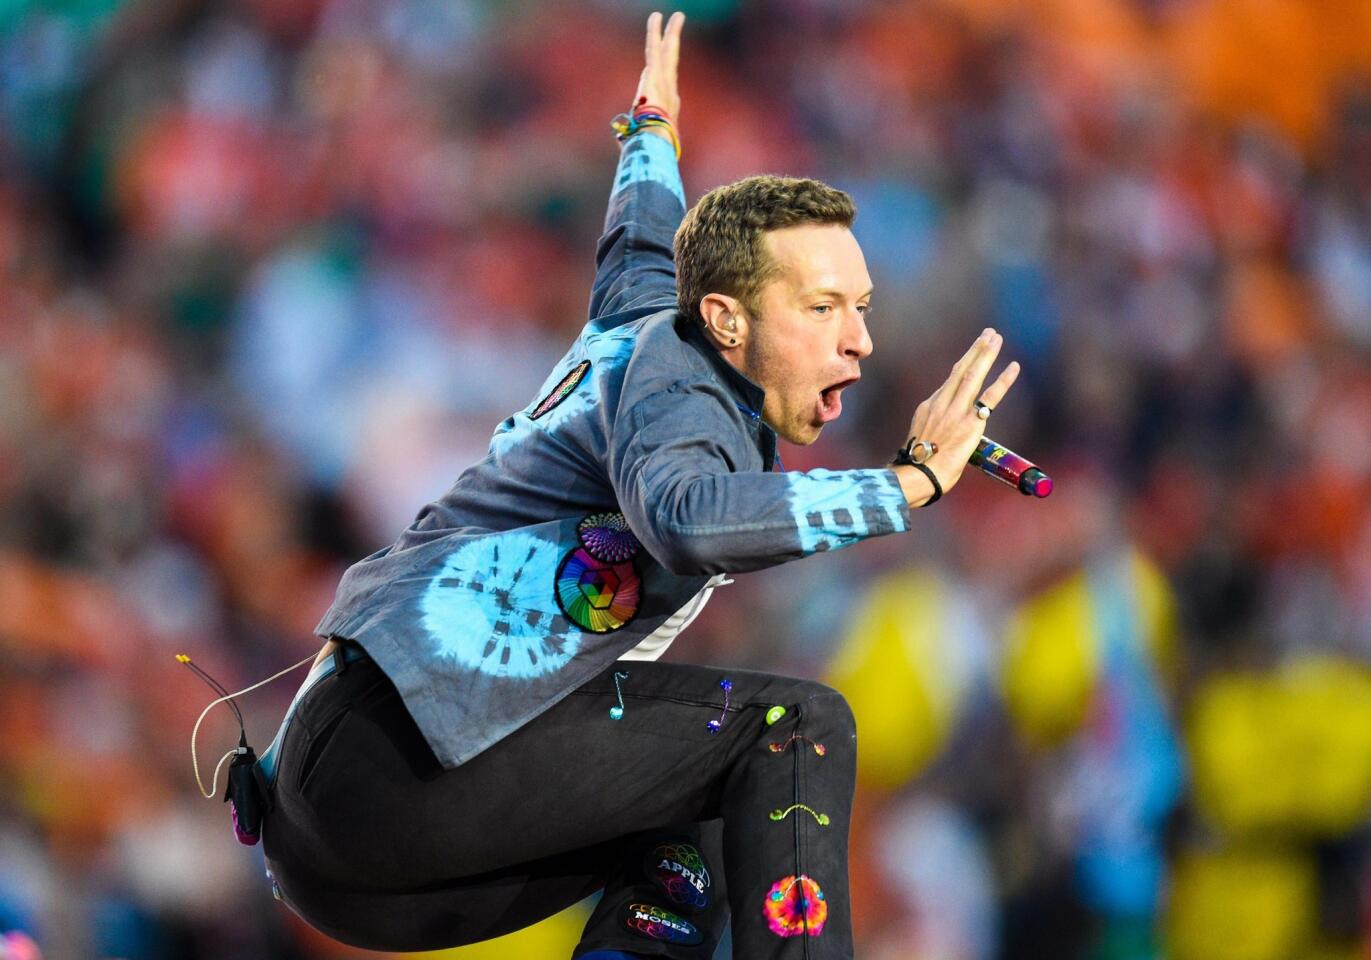 Recording artist Chris Martin of Coldplay performs during halftime between the Carolina Panthers and the Denver Broncos in Super Bowl 50 at Levi's Stadium. Mandatory Credit: Kyle Terada-USA TODAY Sports